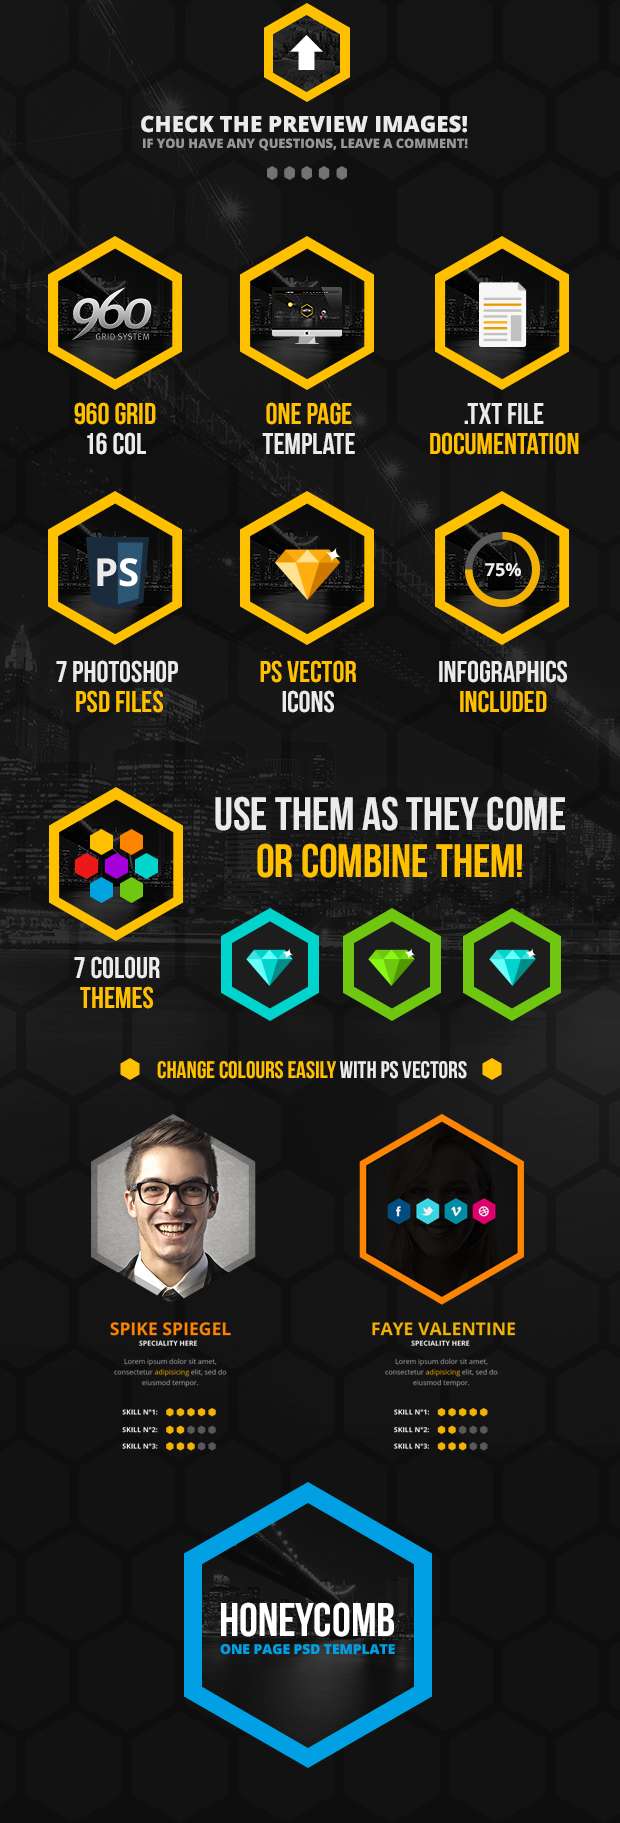 Honeycomb One Page PSD Template - 2